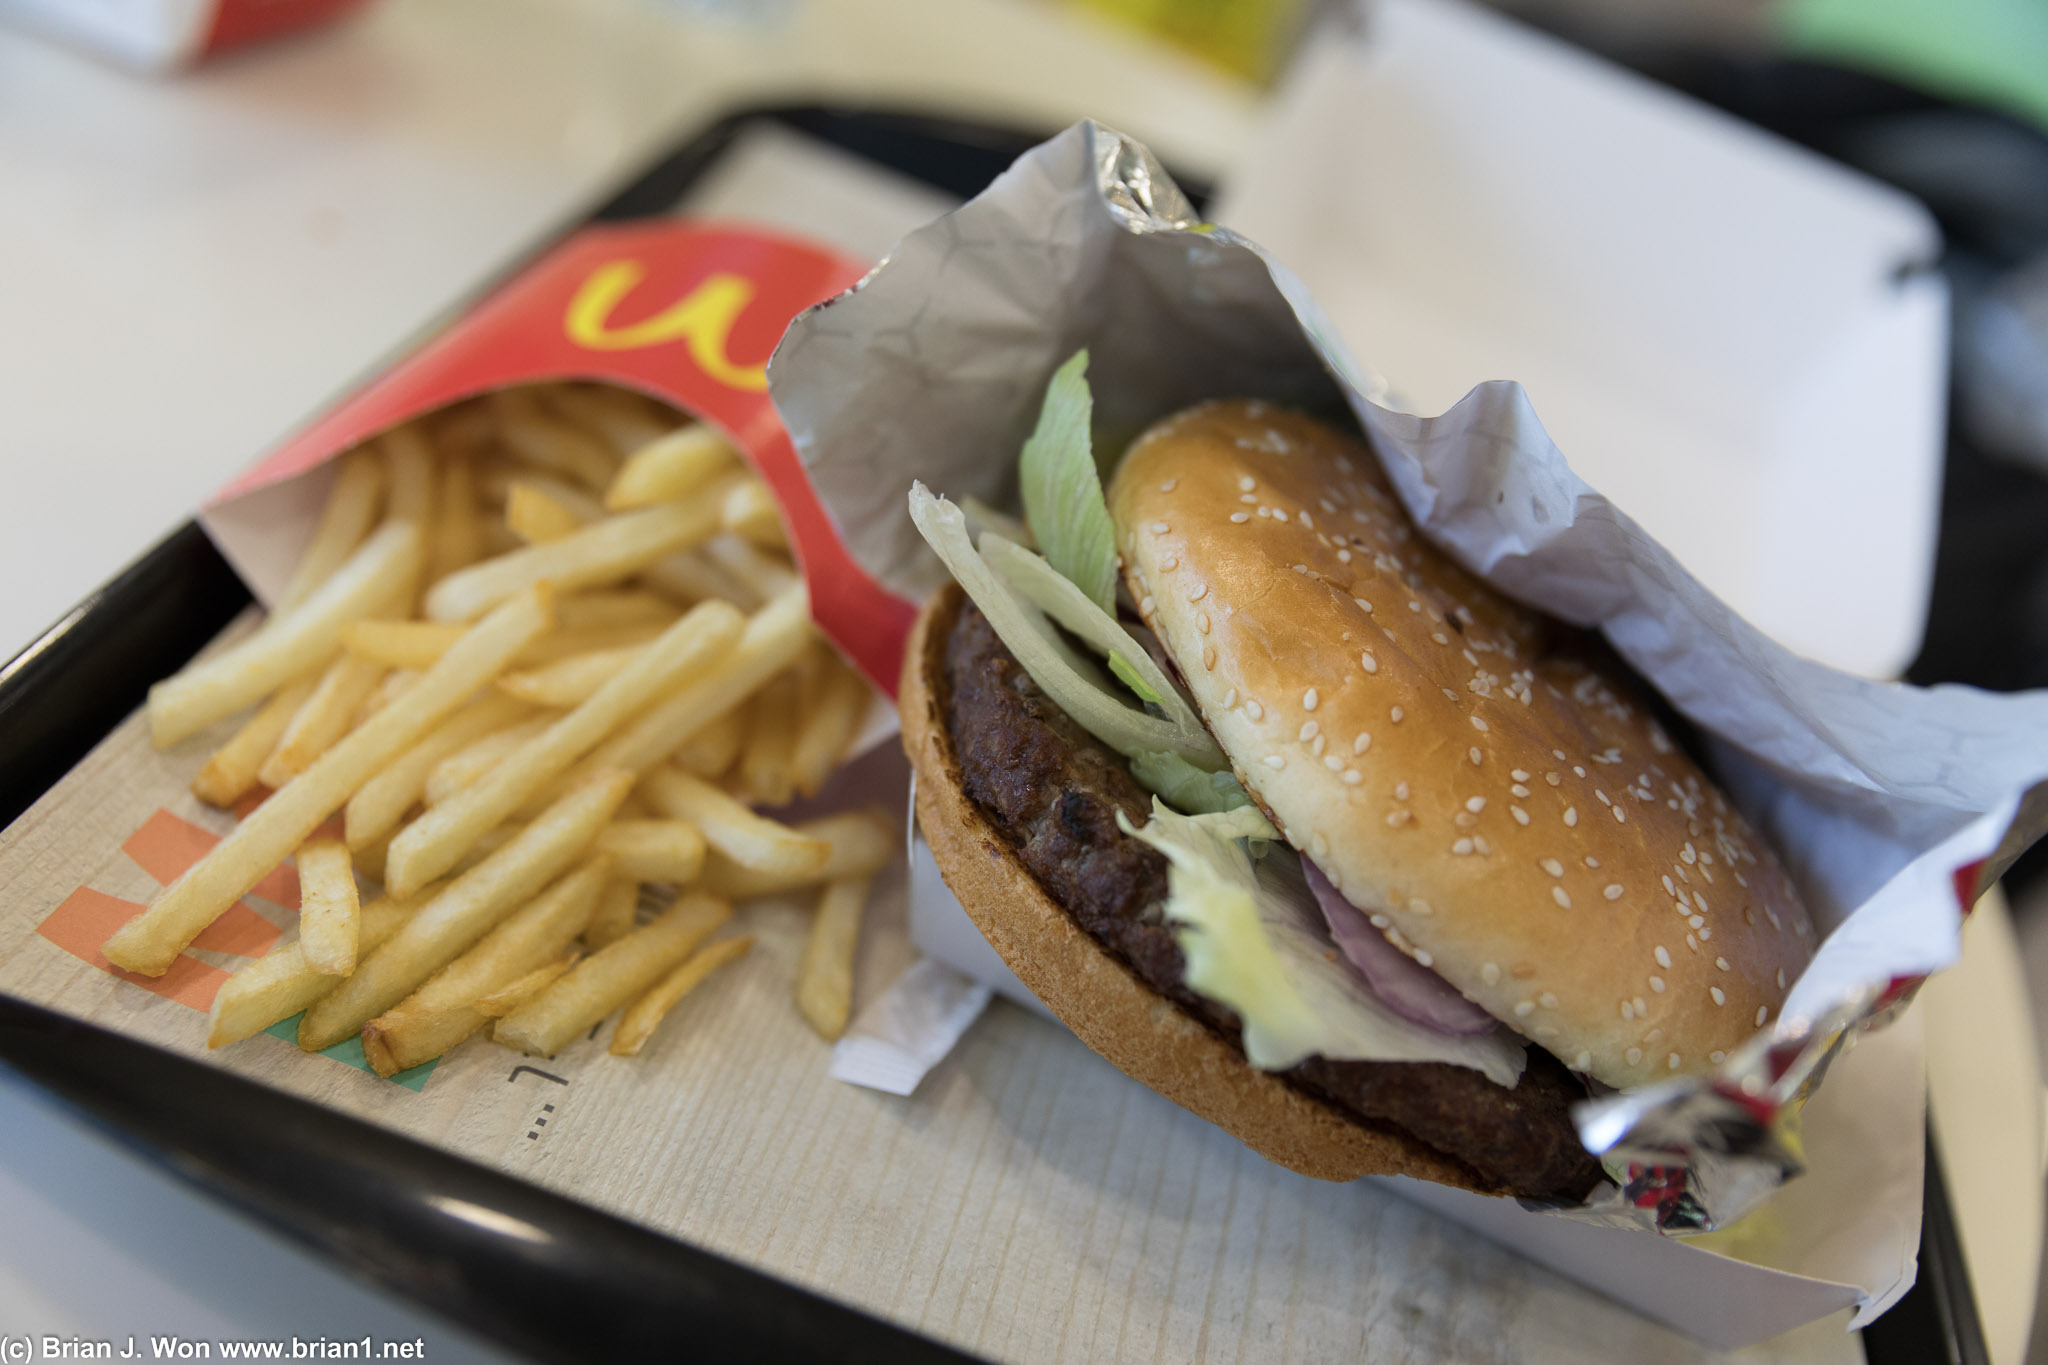 What a $16 burger at McDonald's looks like. o_0